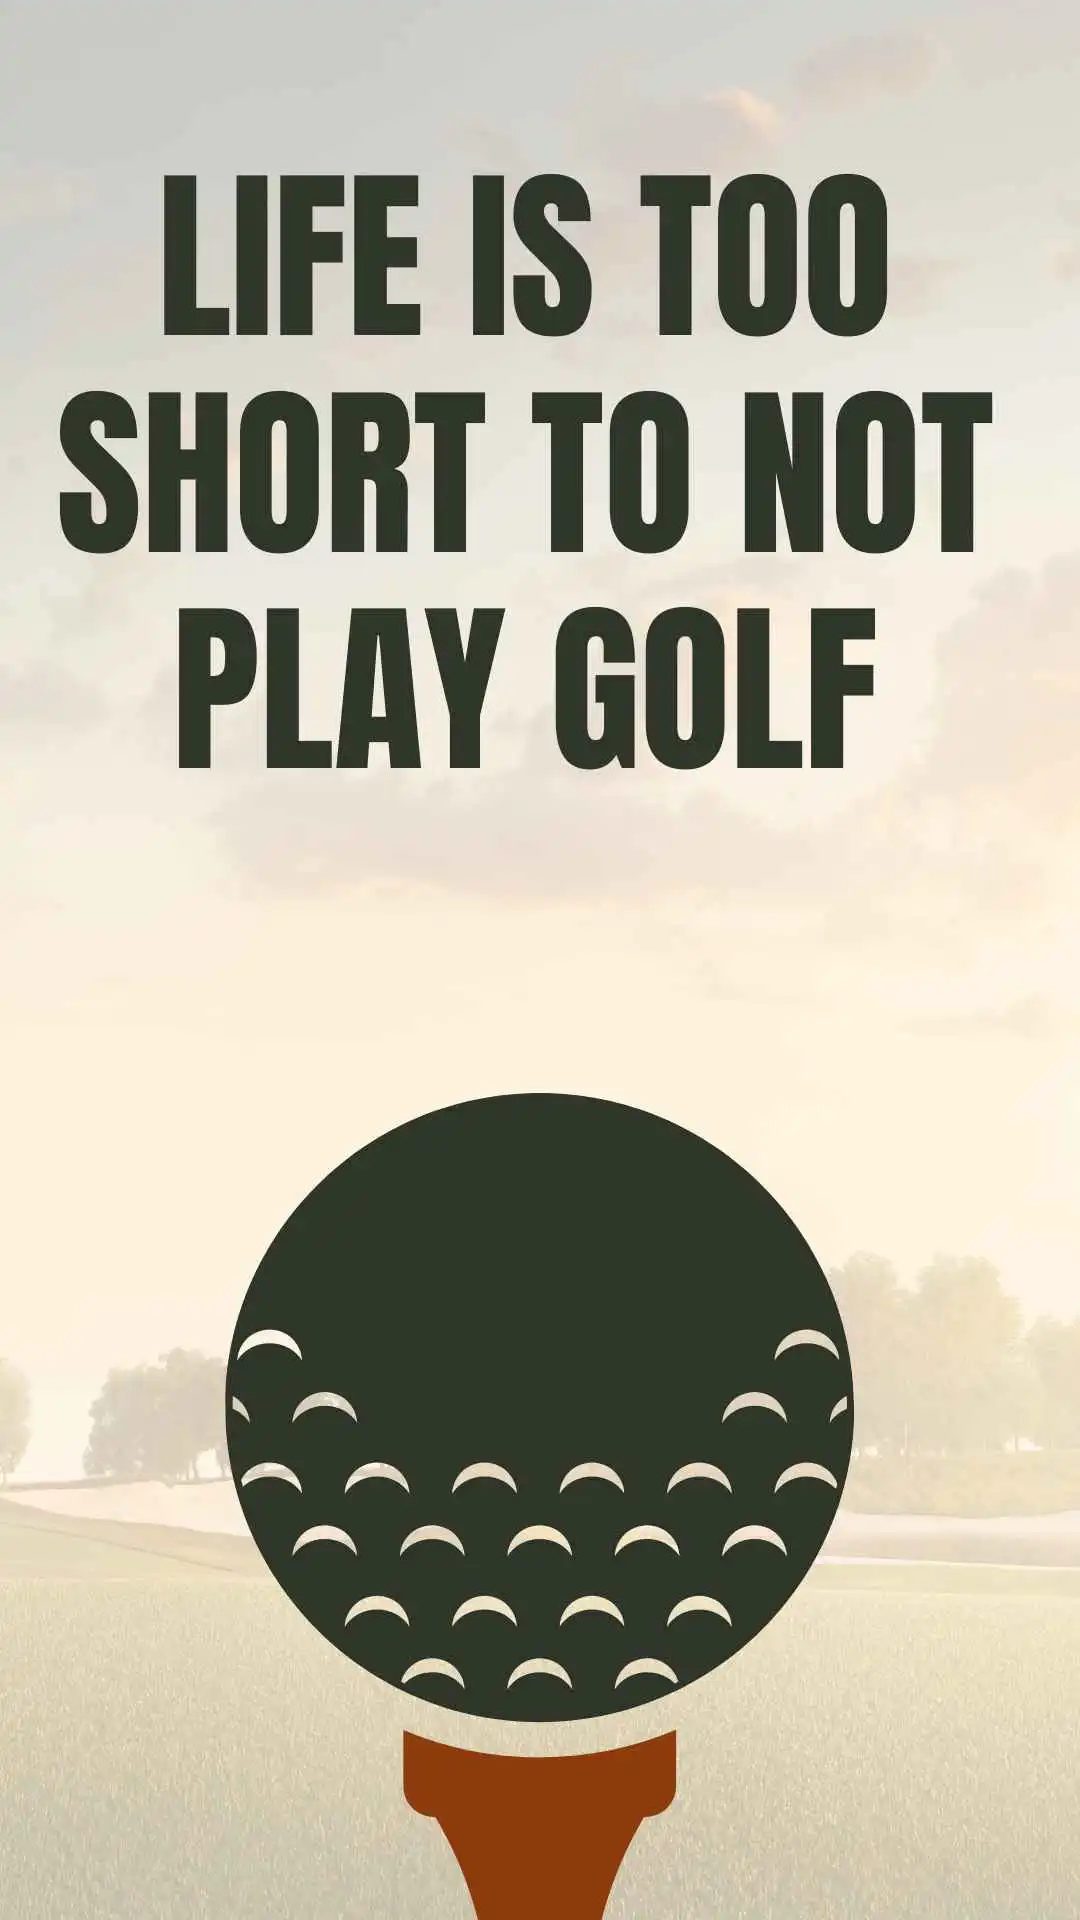 Life is too short to not play golf.